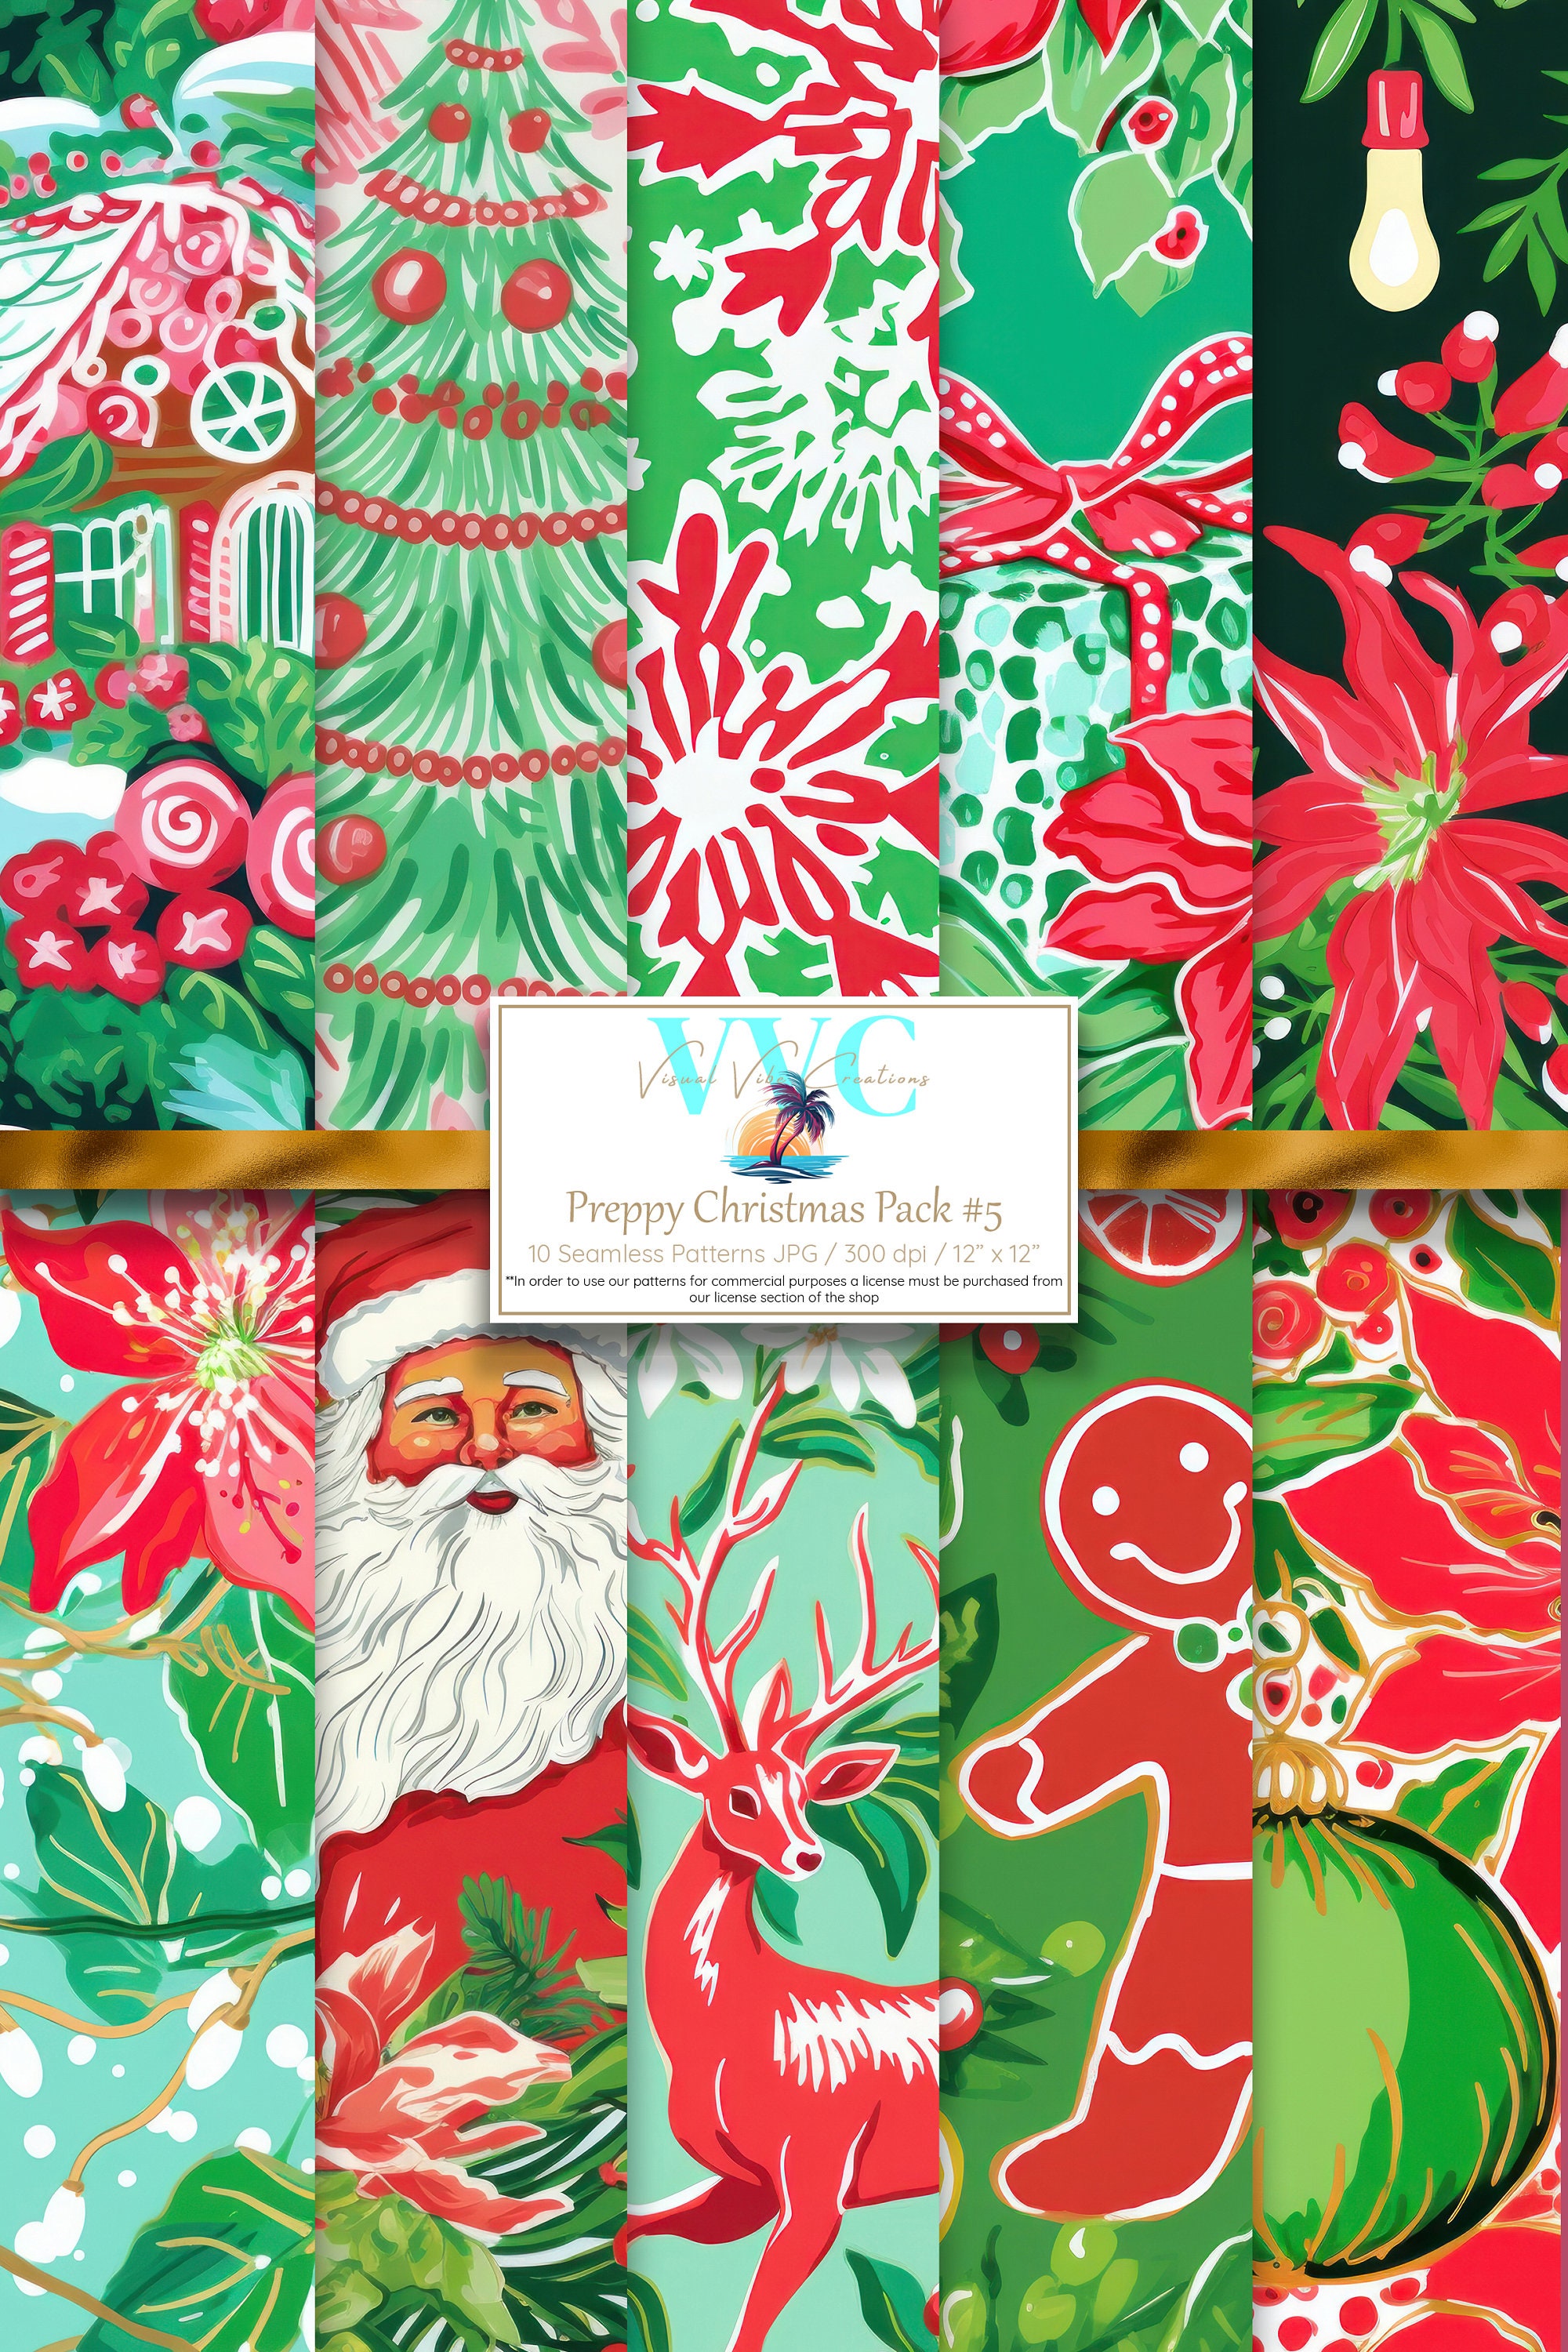 16 Preppy Christmas Seamless Patterns Graphic by BLDGtheBrand